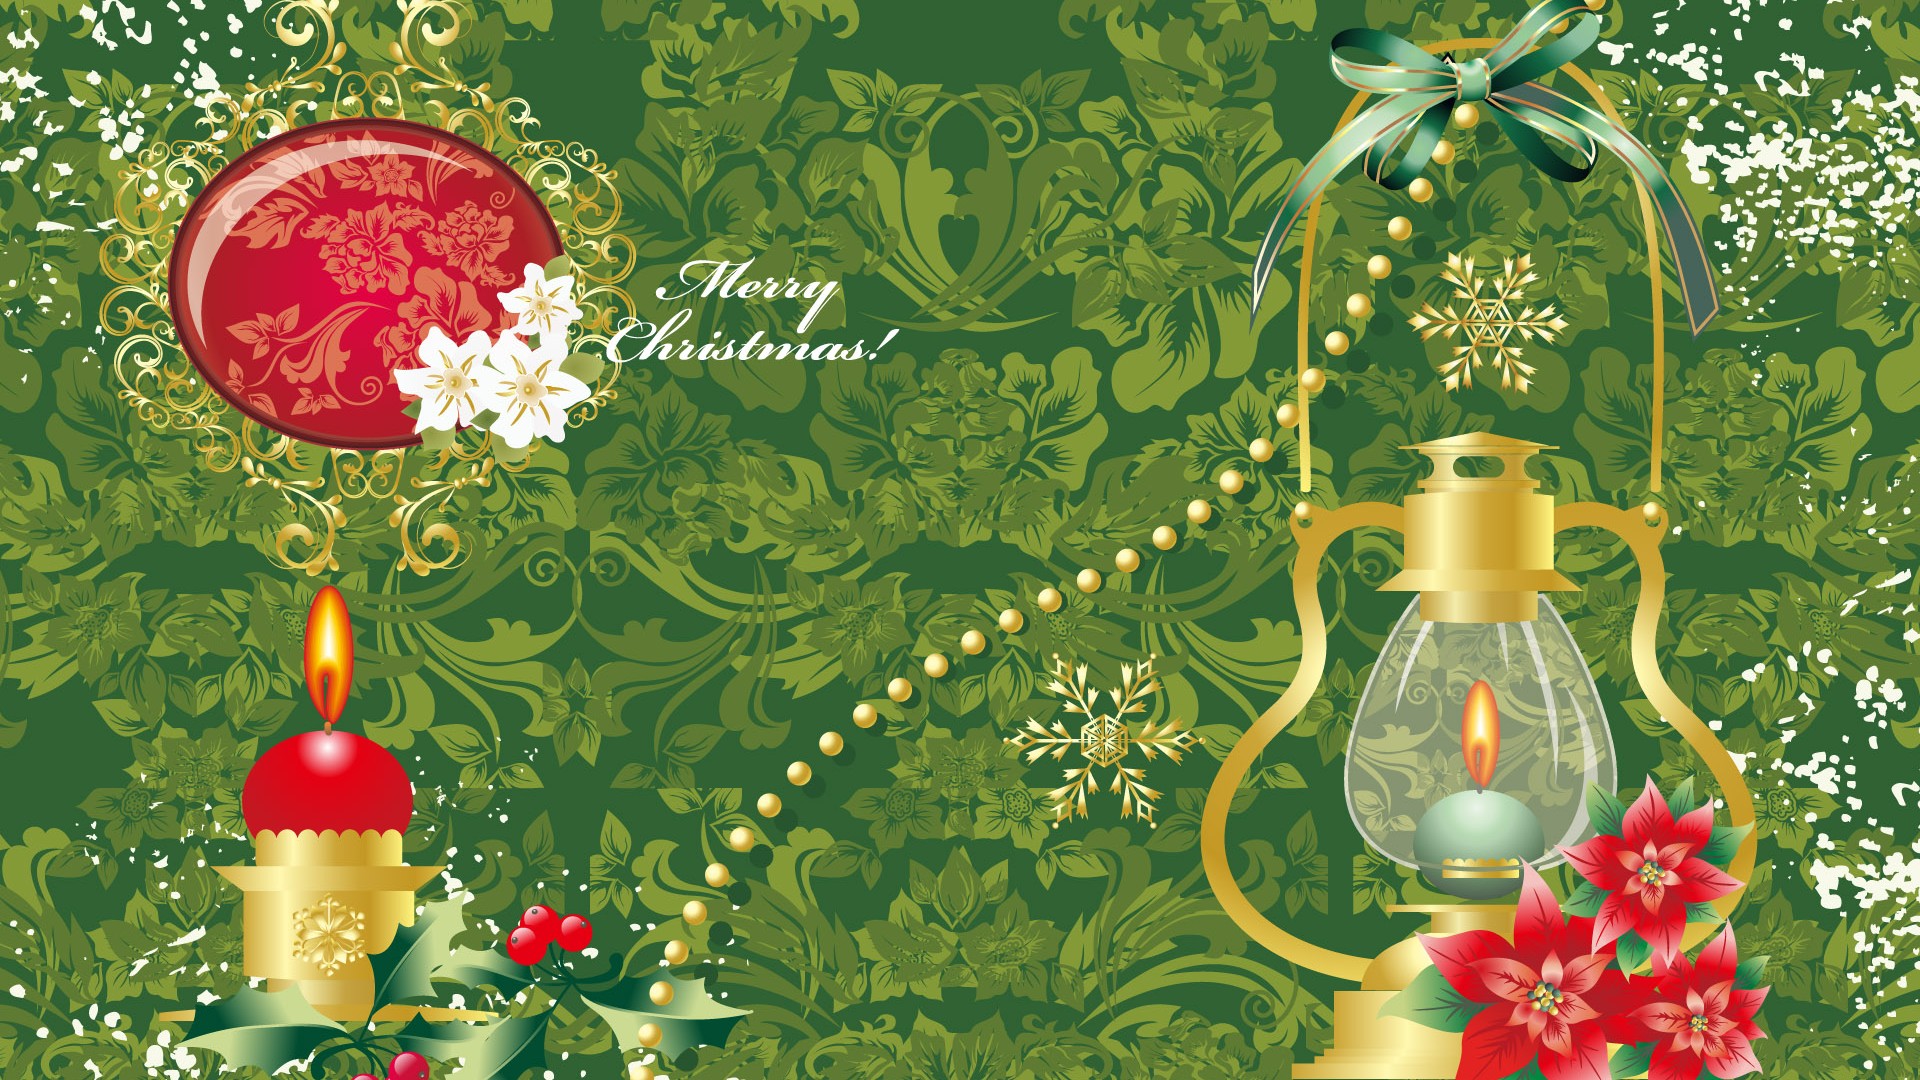 Exquisite Christmas Theme HD Wallpapers #23 - 1920x1080